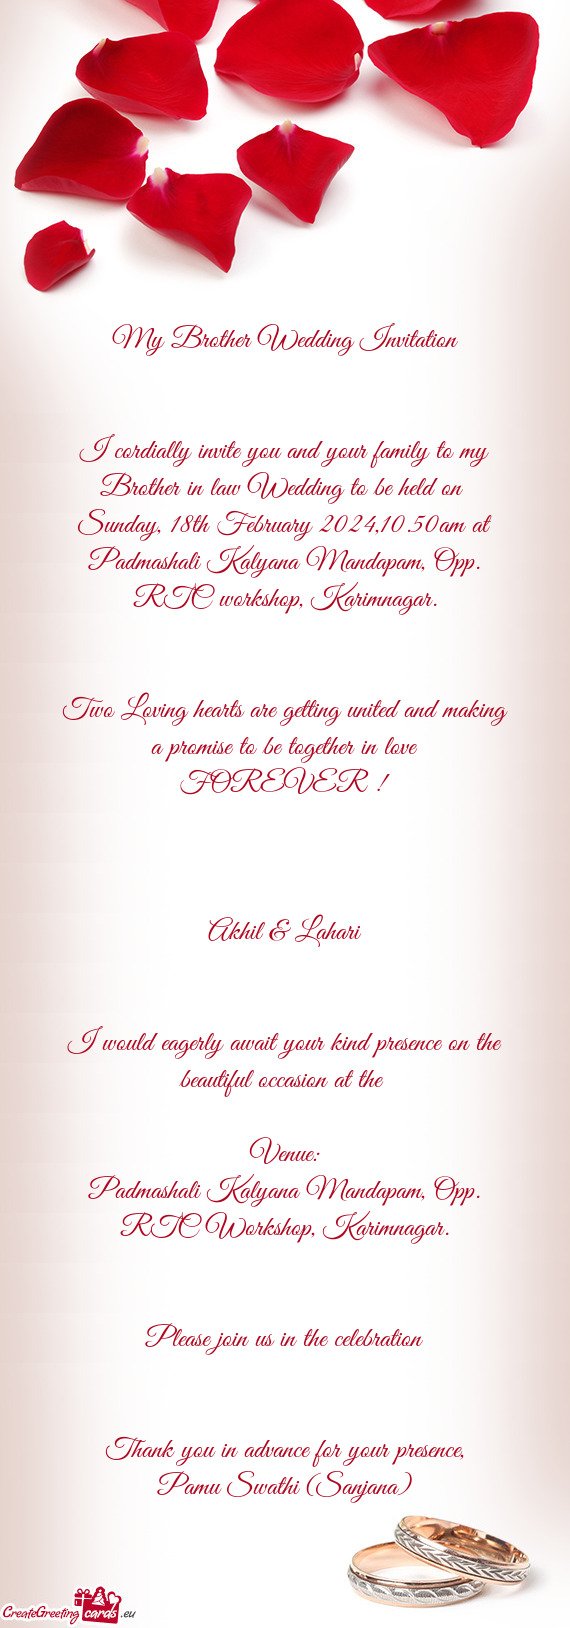 My Brother Wedding Invitation  I cordially invite you and your family to my Brother in law Weddi